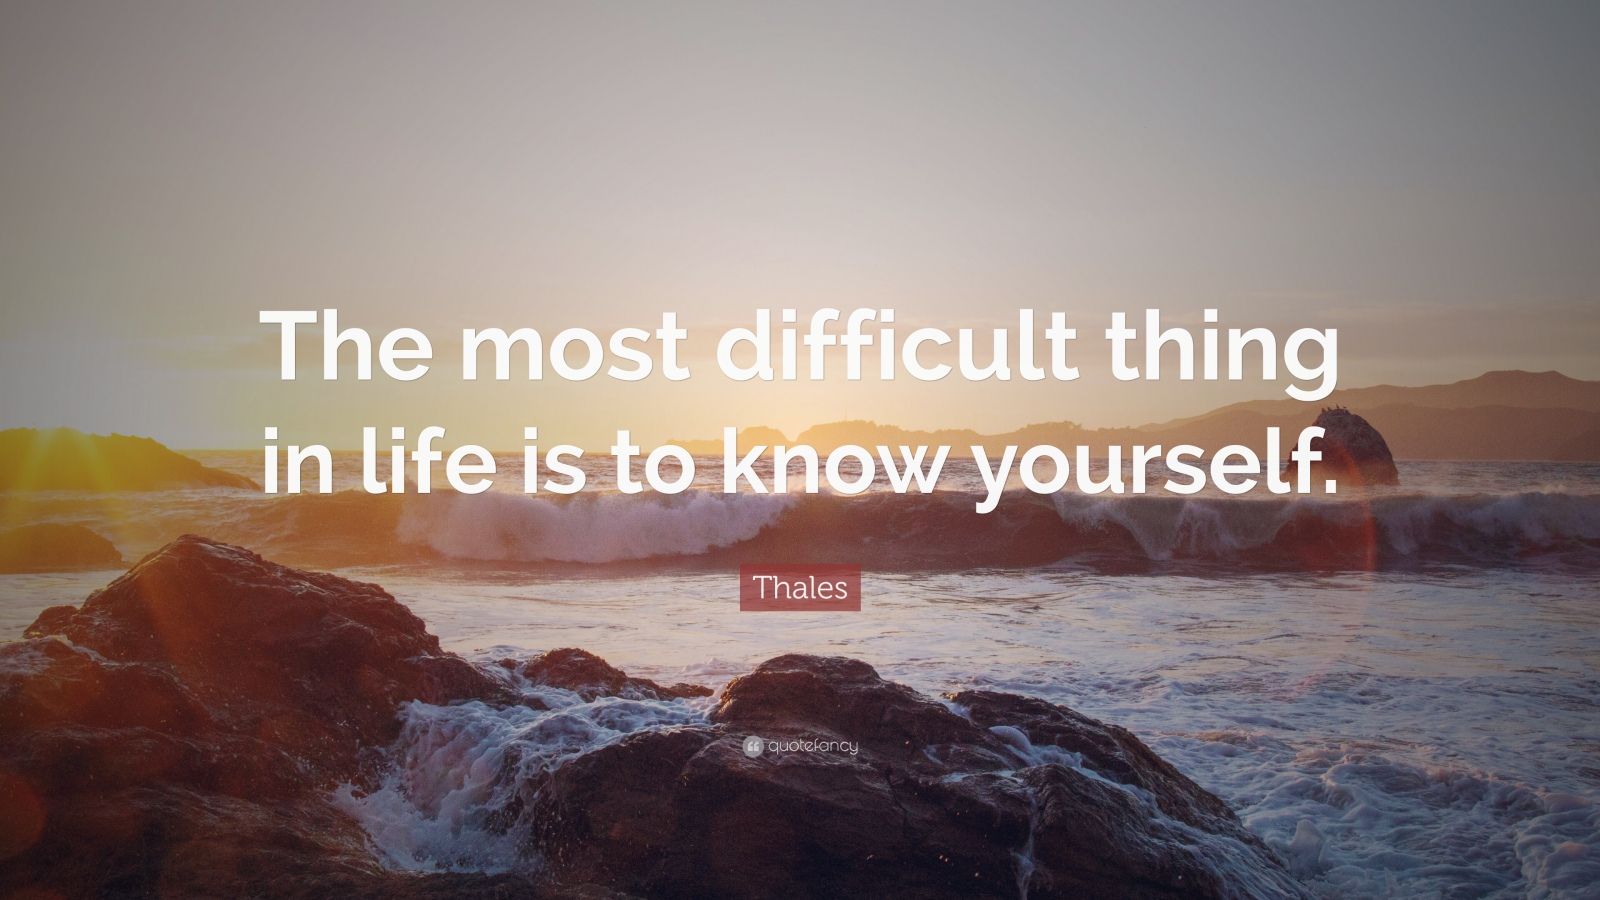 what is the most difficult thing in life